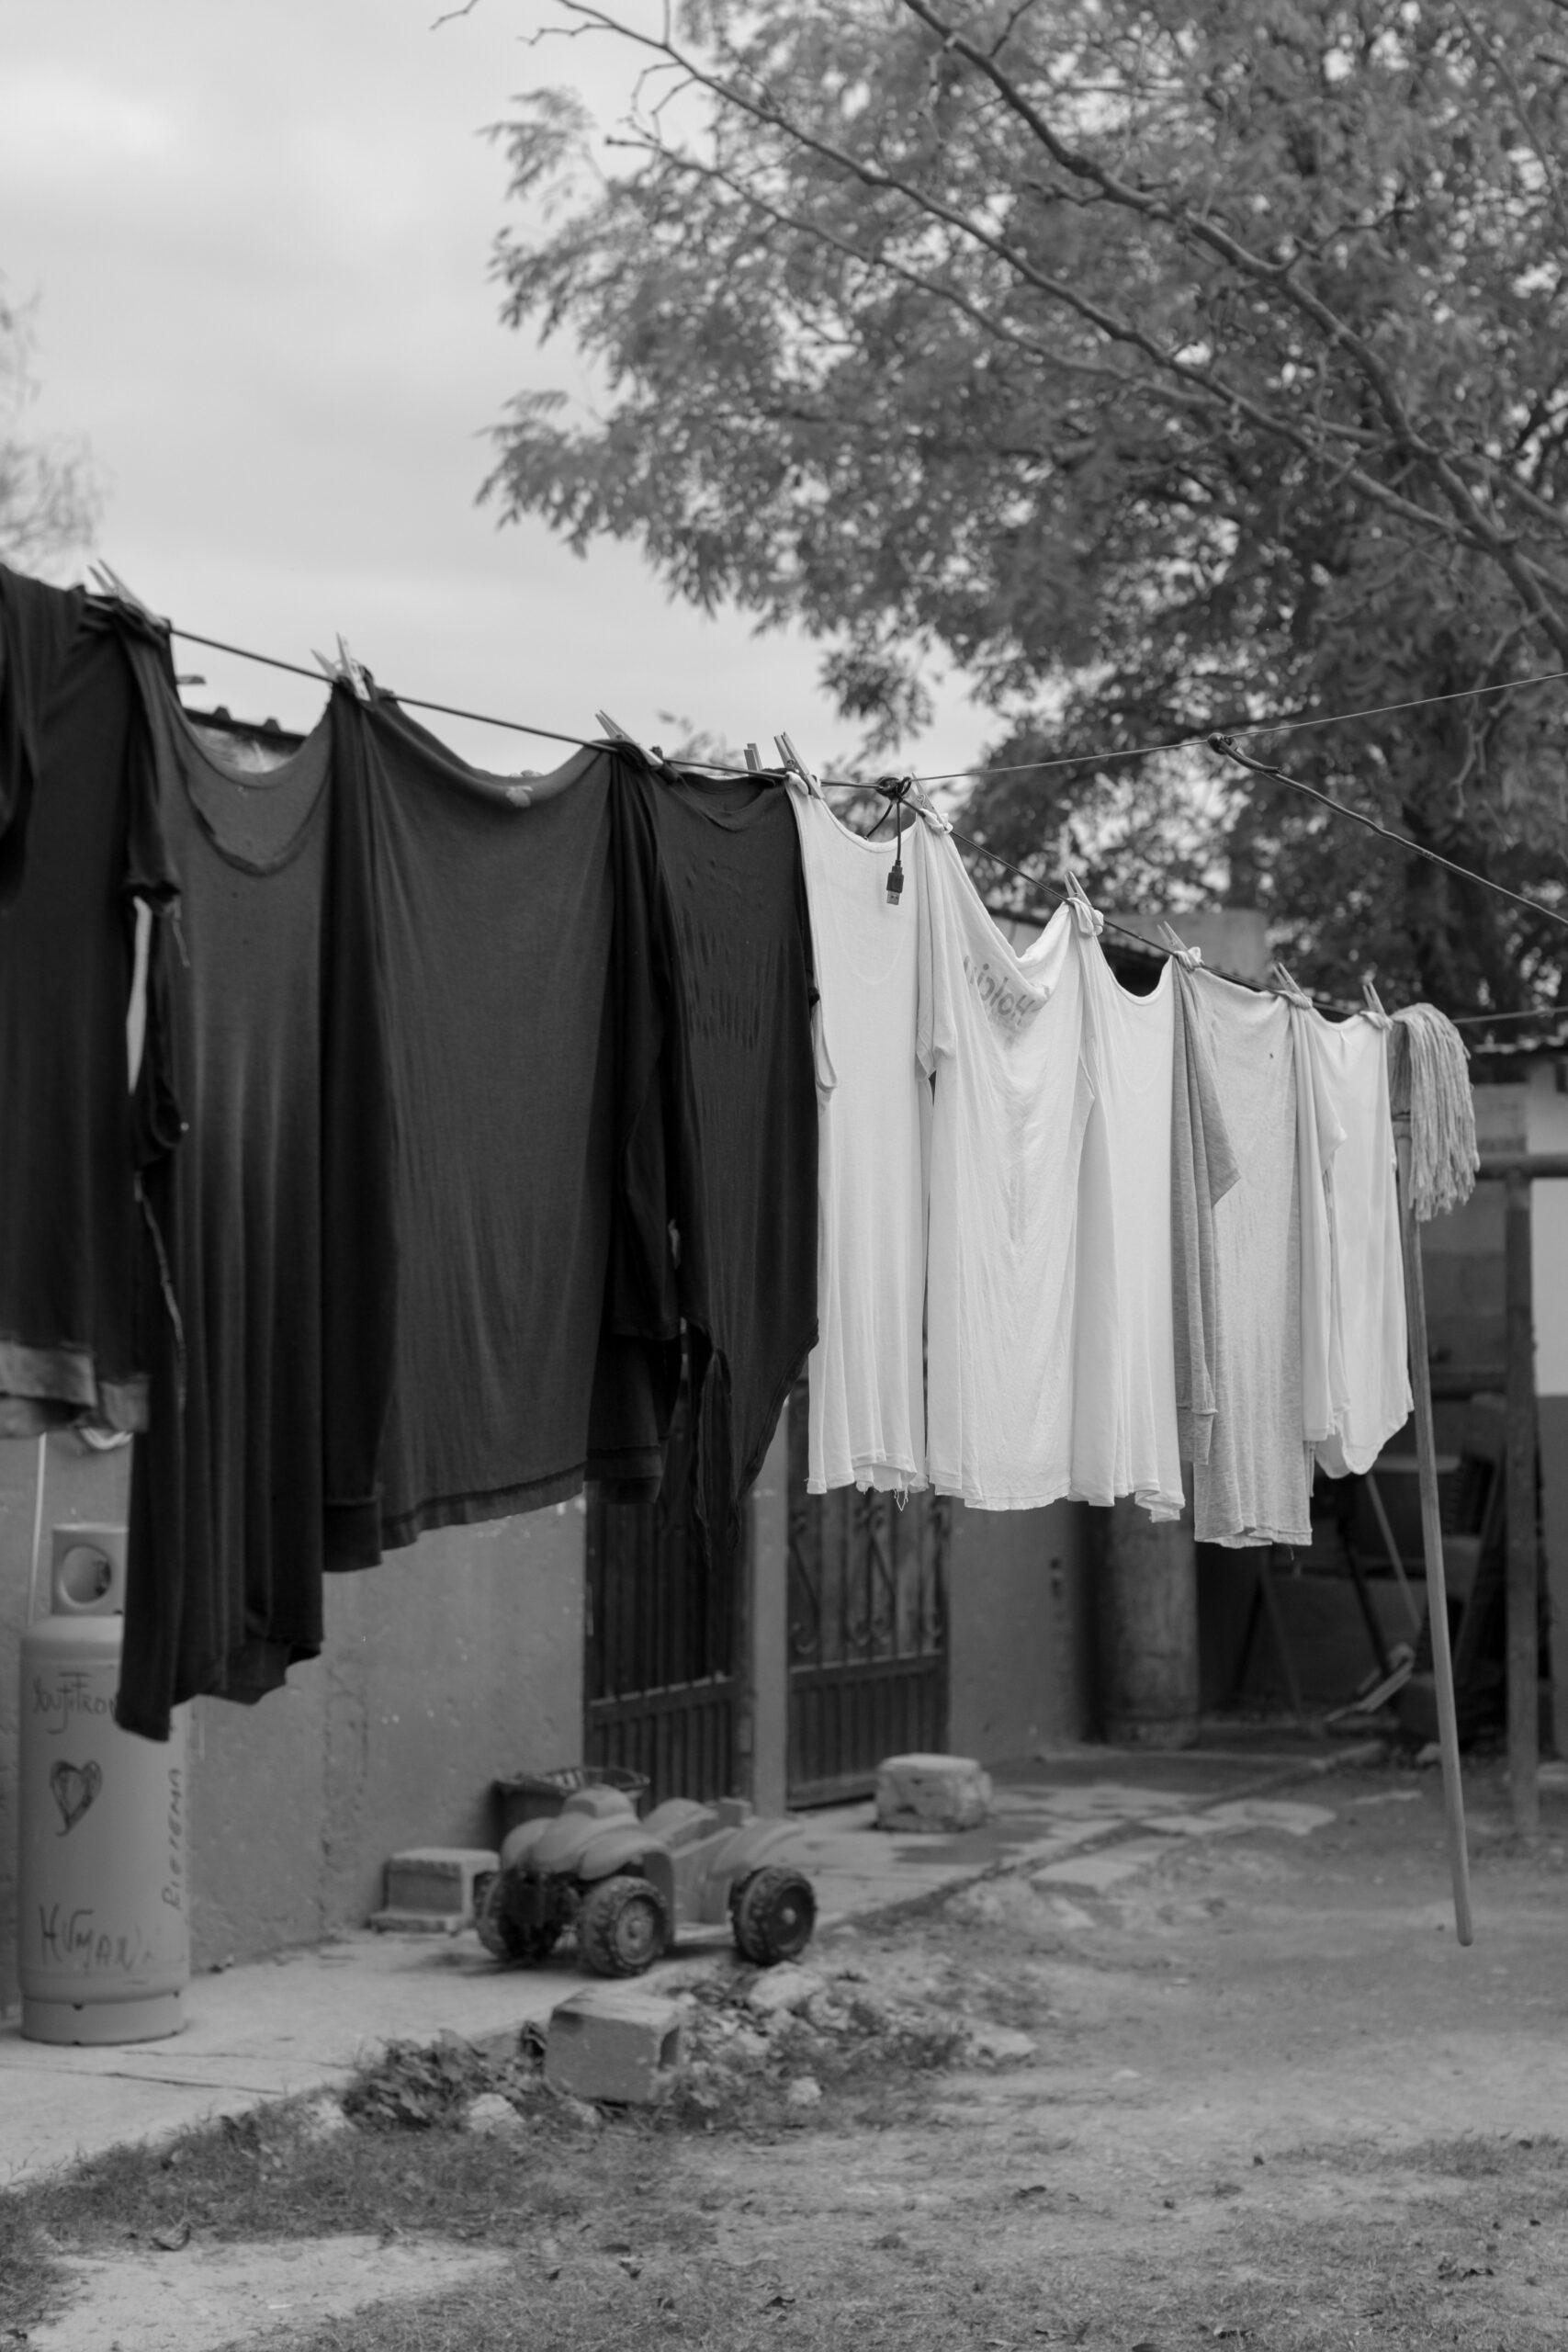 Clothes hang to dry on a clotheslines in the yard of a migrant home in Acuña, Mexico